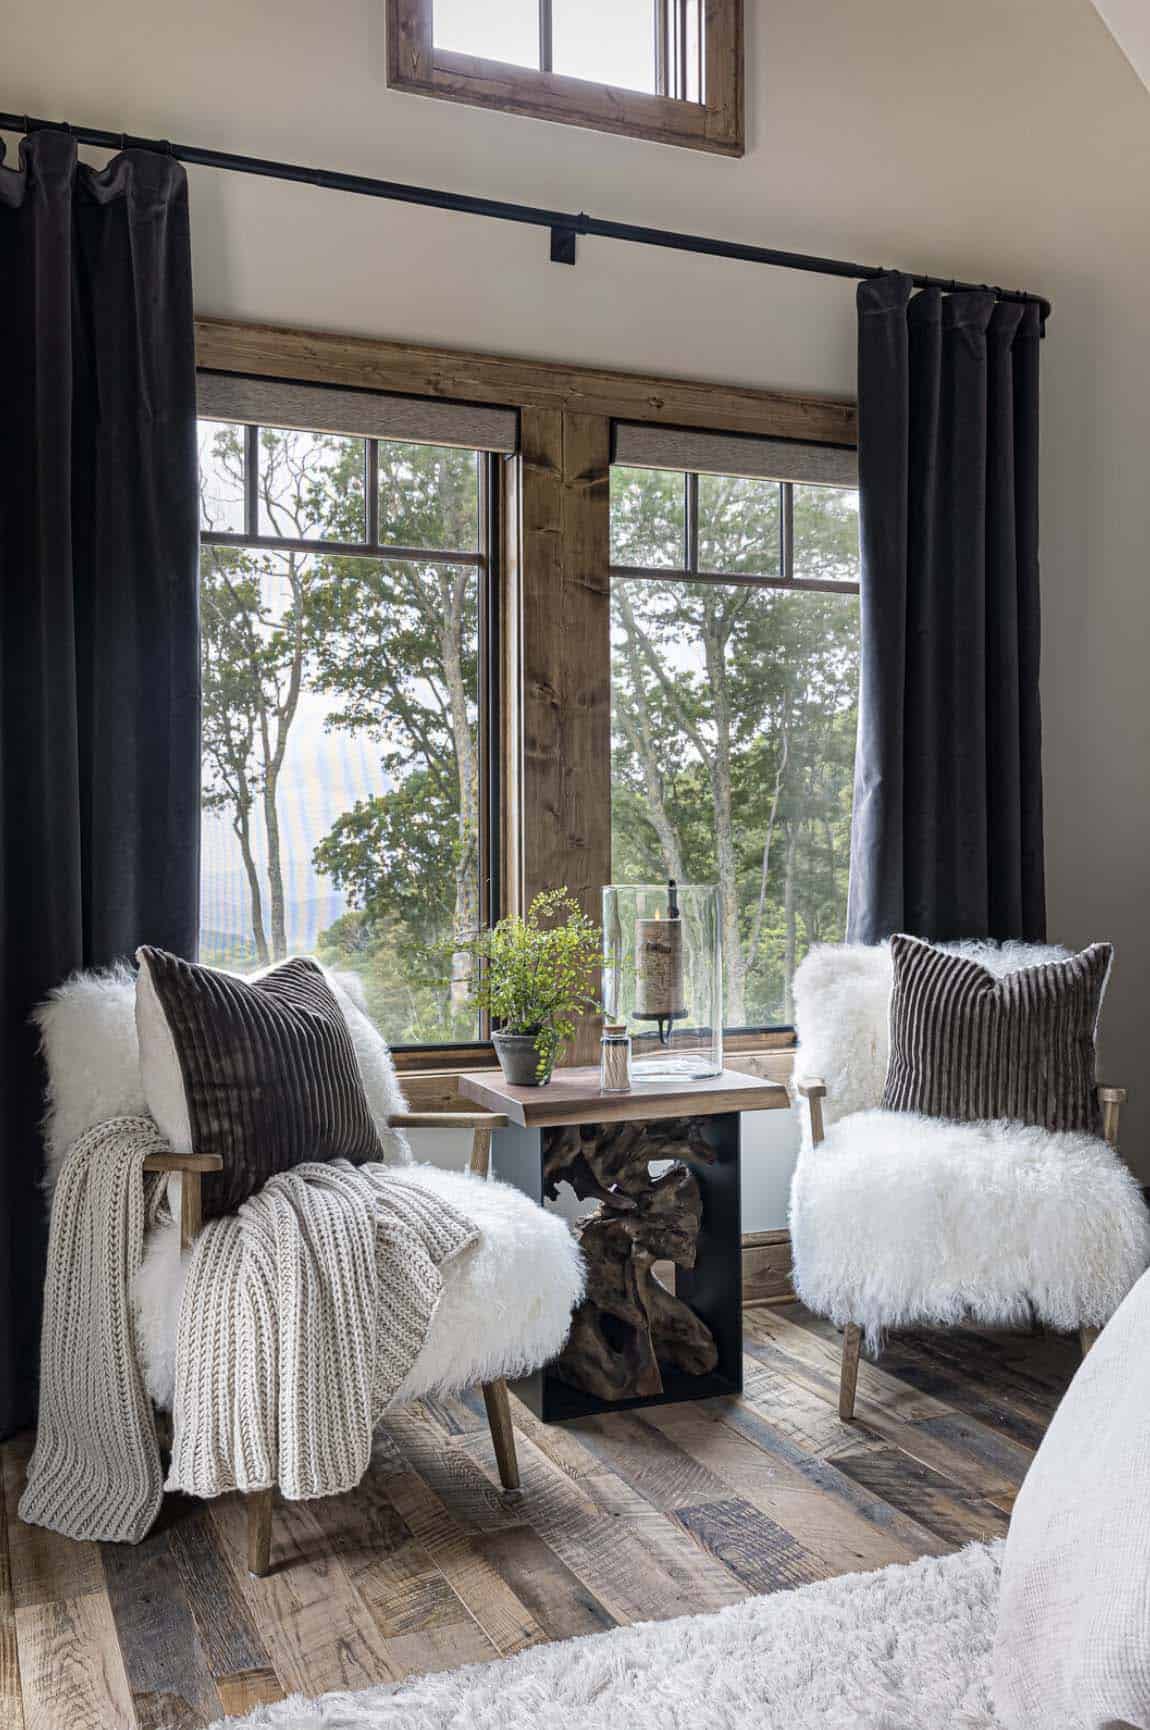 modern rustic bedroom sitting area in front of a window